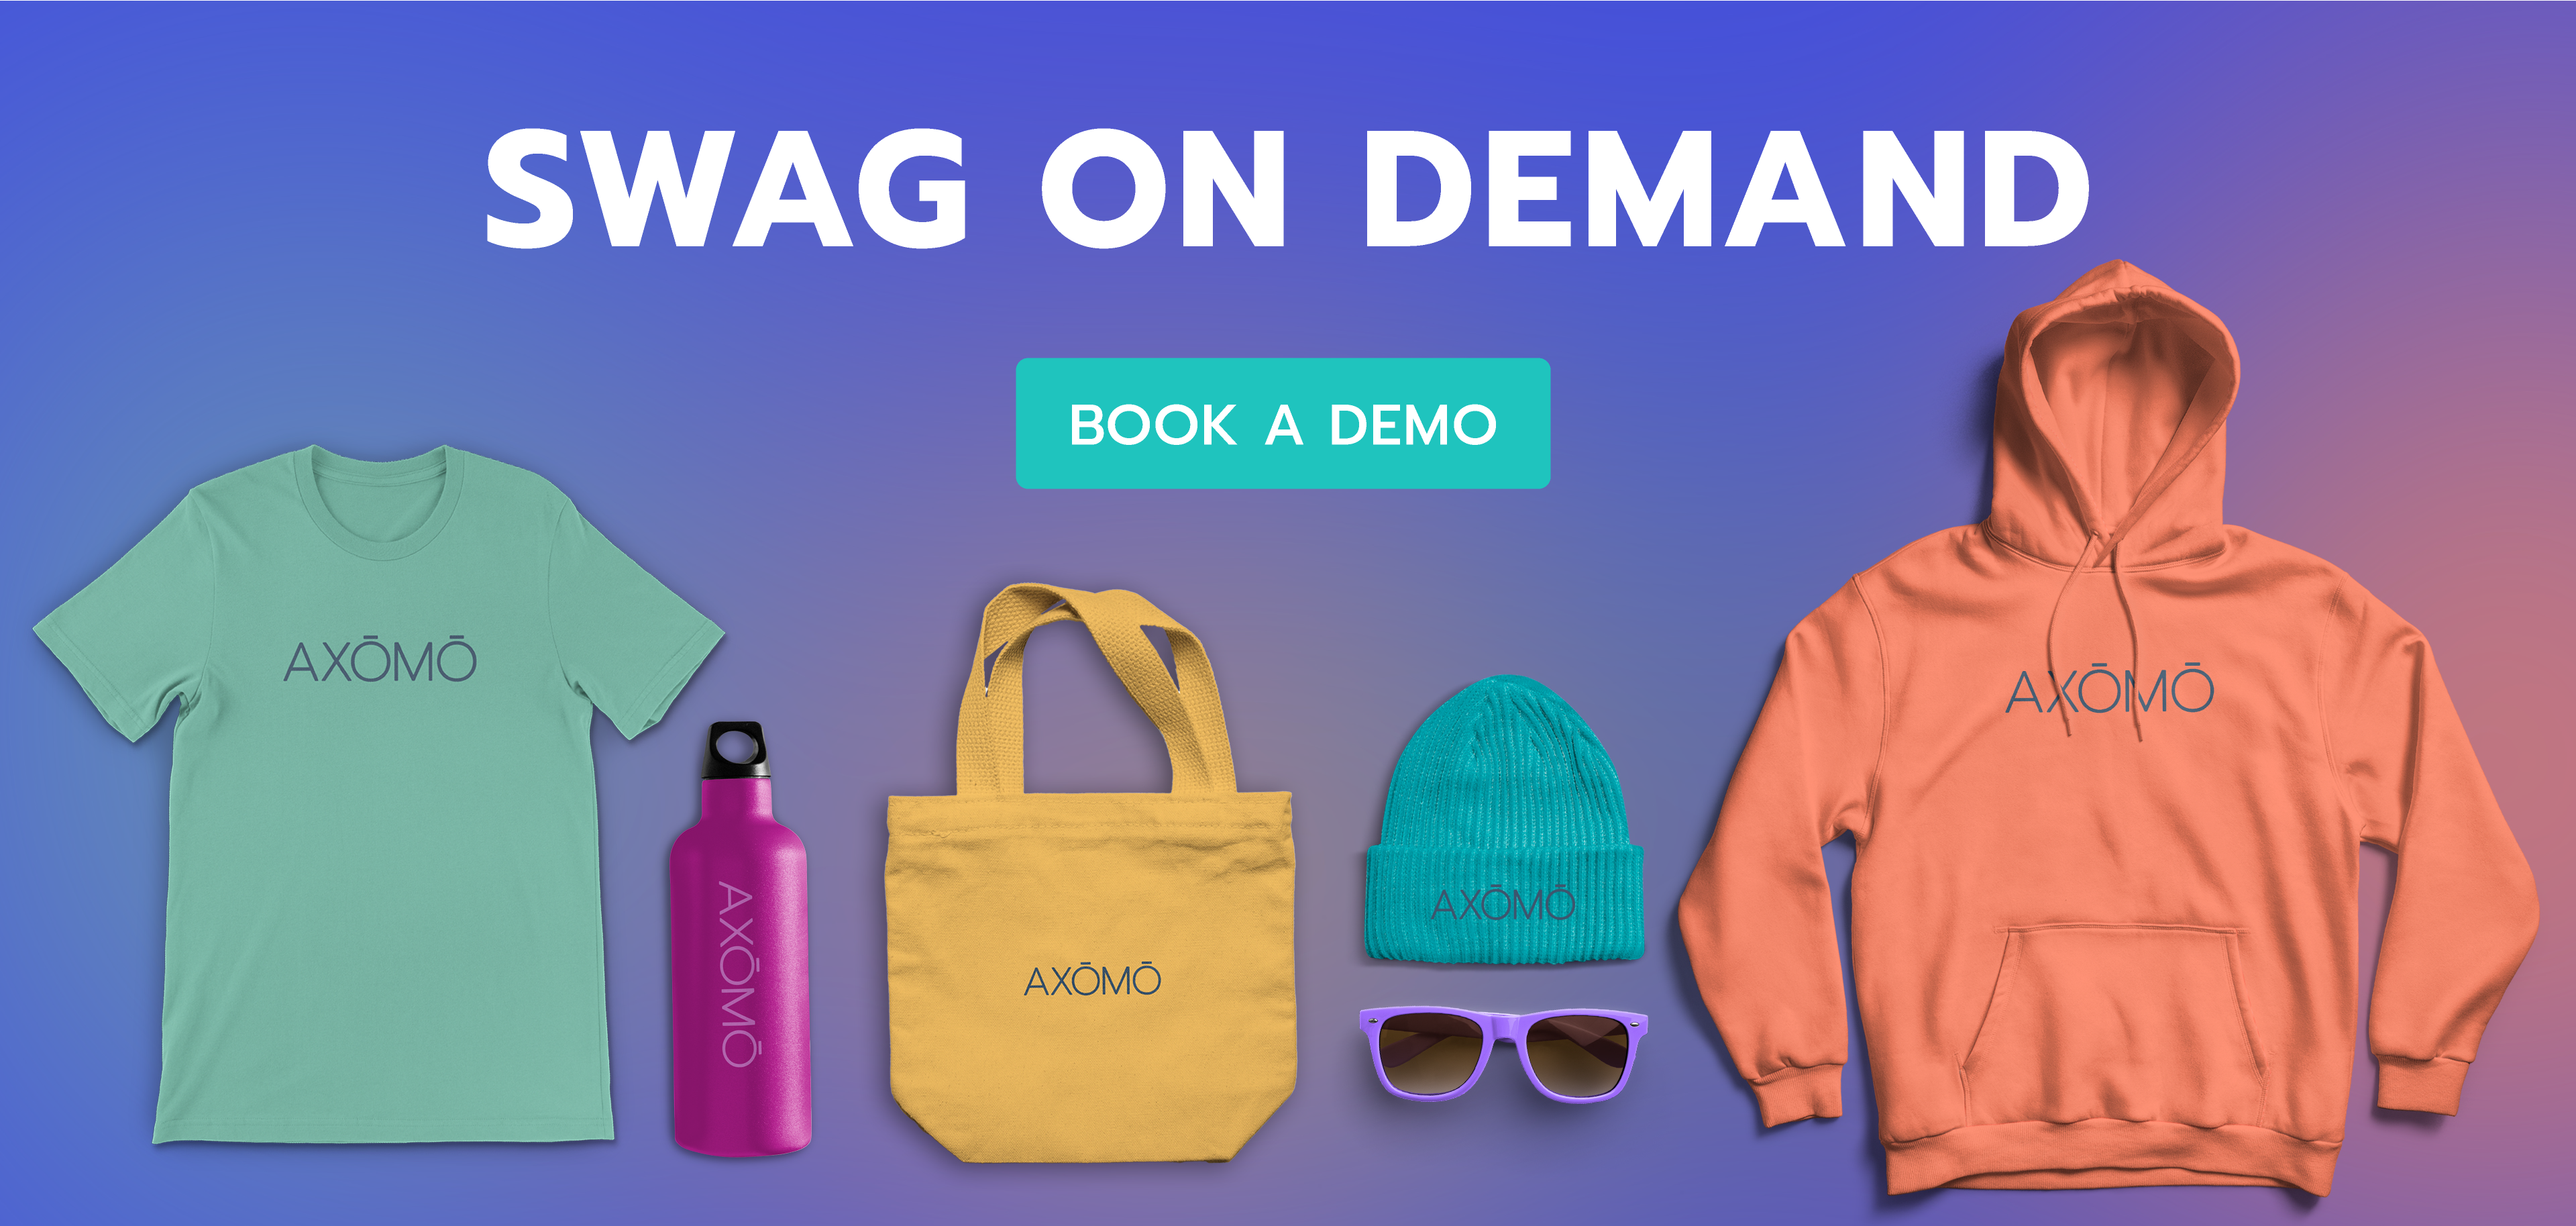 Colorful apparel. A button that says book a demo